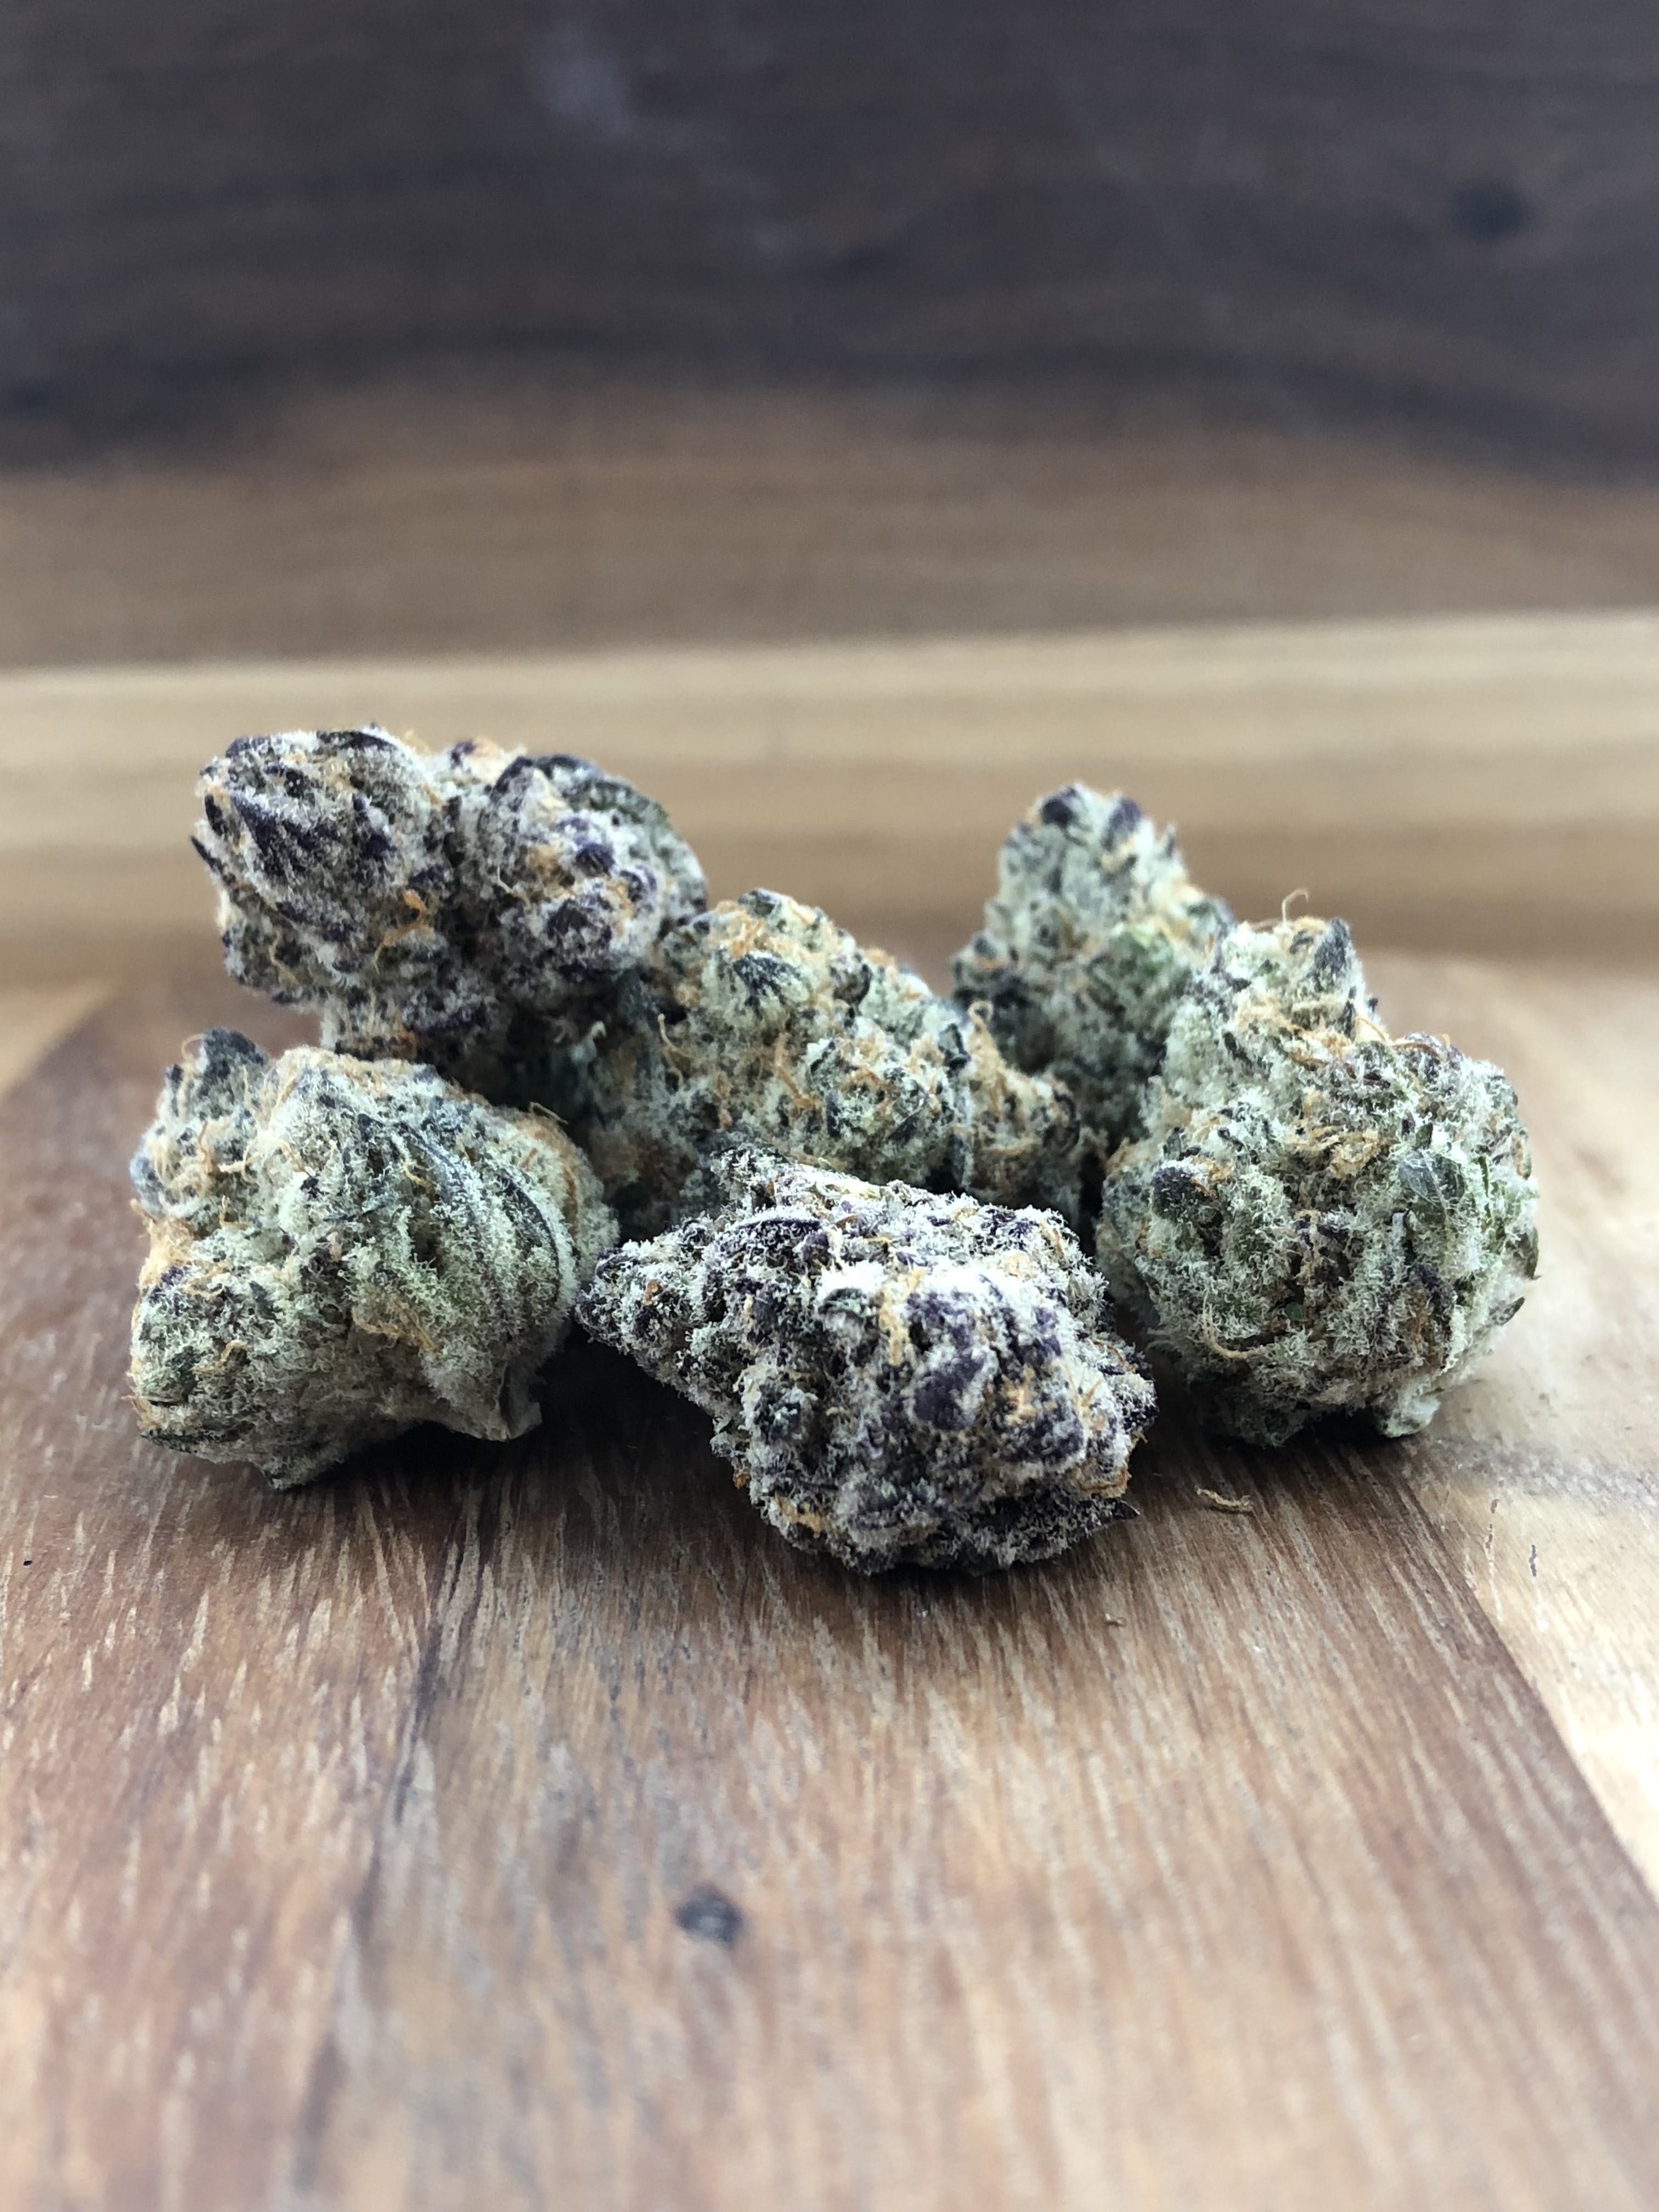 marijuana-dispensaries-350-w-martin-luther-king-jr-blvd-los-angeles-purple-punch-by-cream-of-the-crop